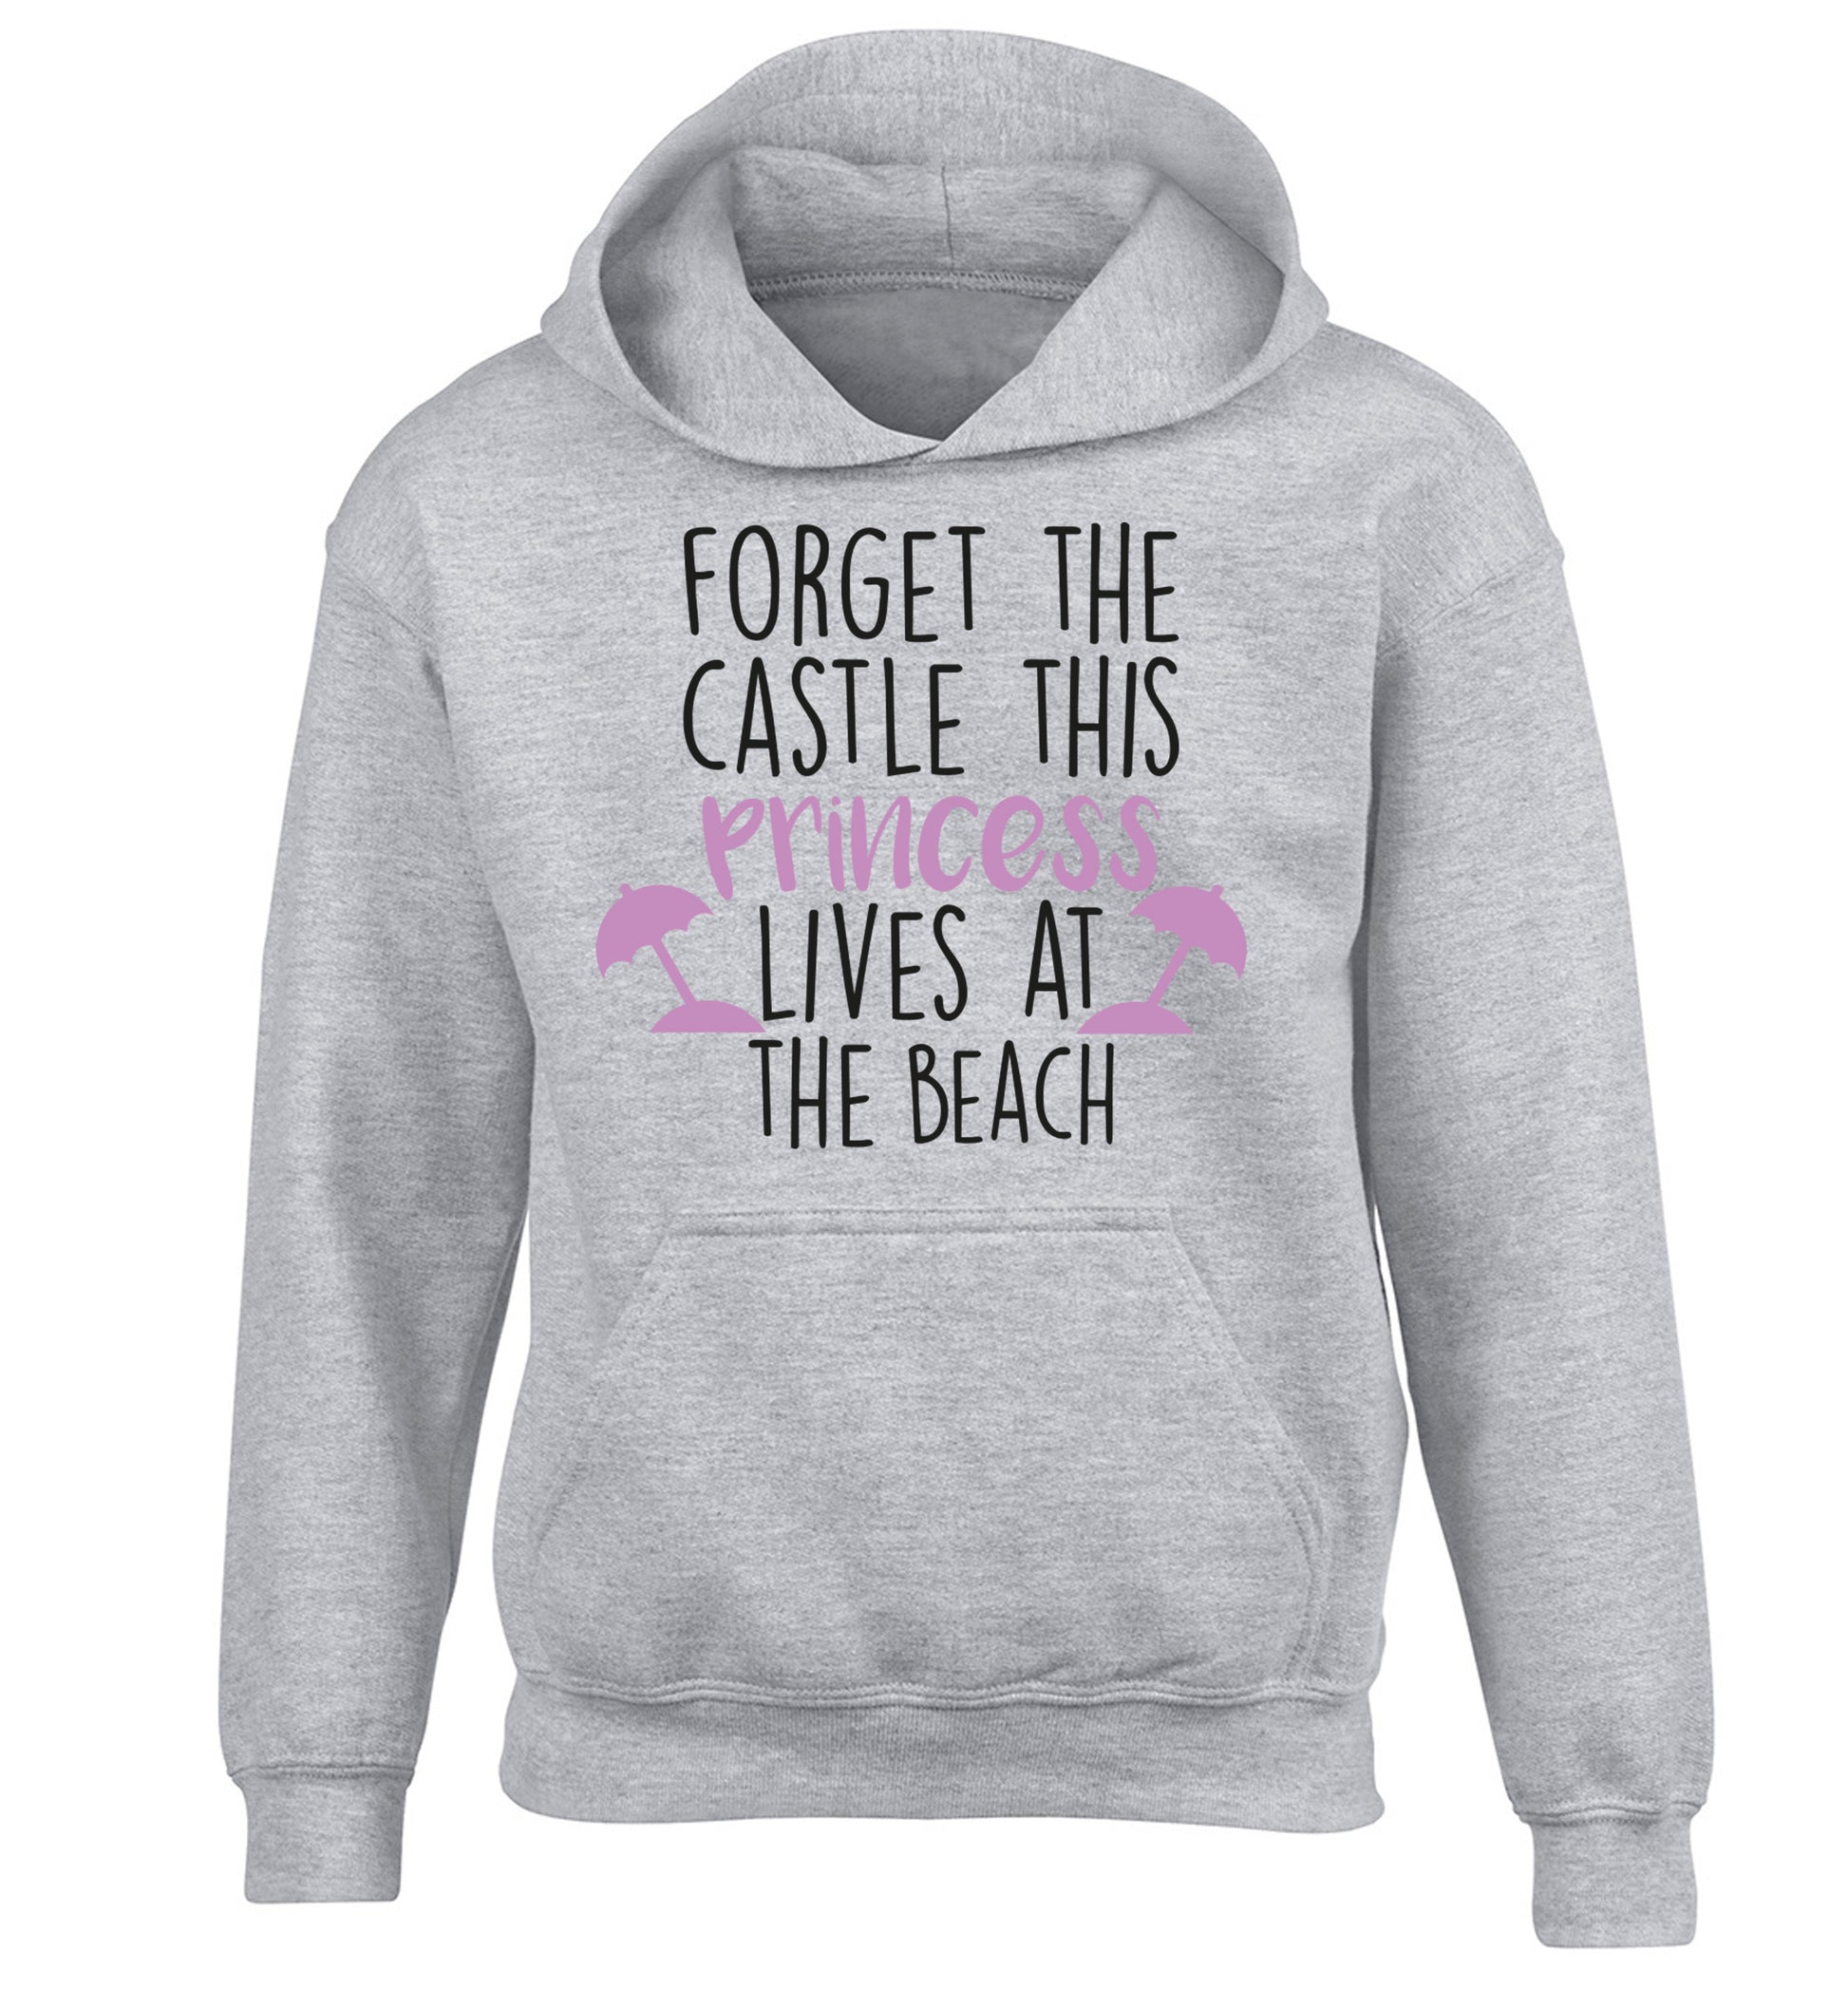 Forget the castle this princess lives at the beach children's grey hoodie 12-14 Years